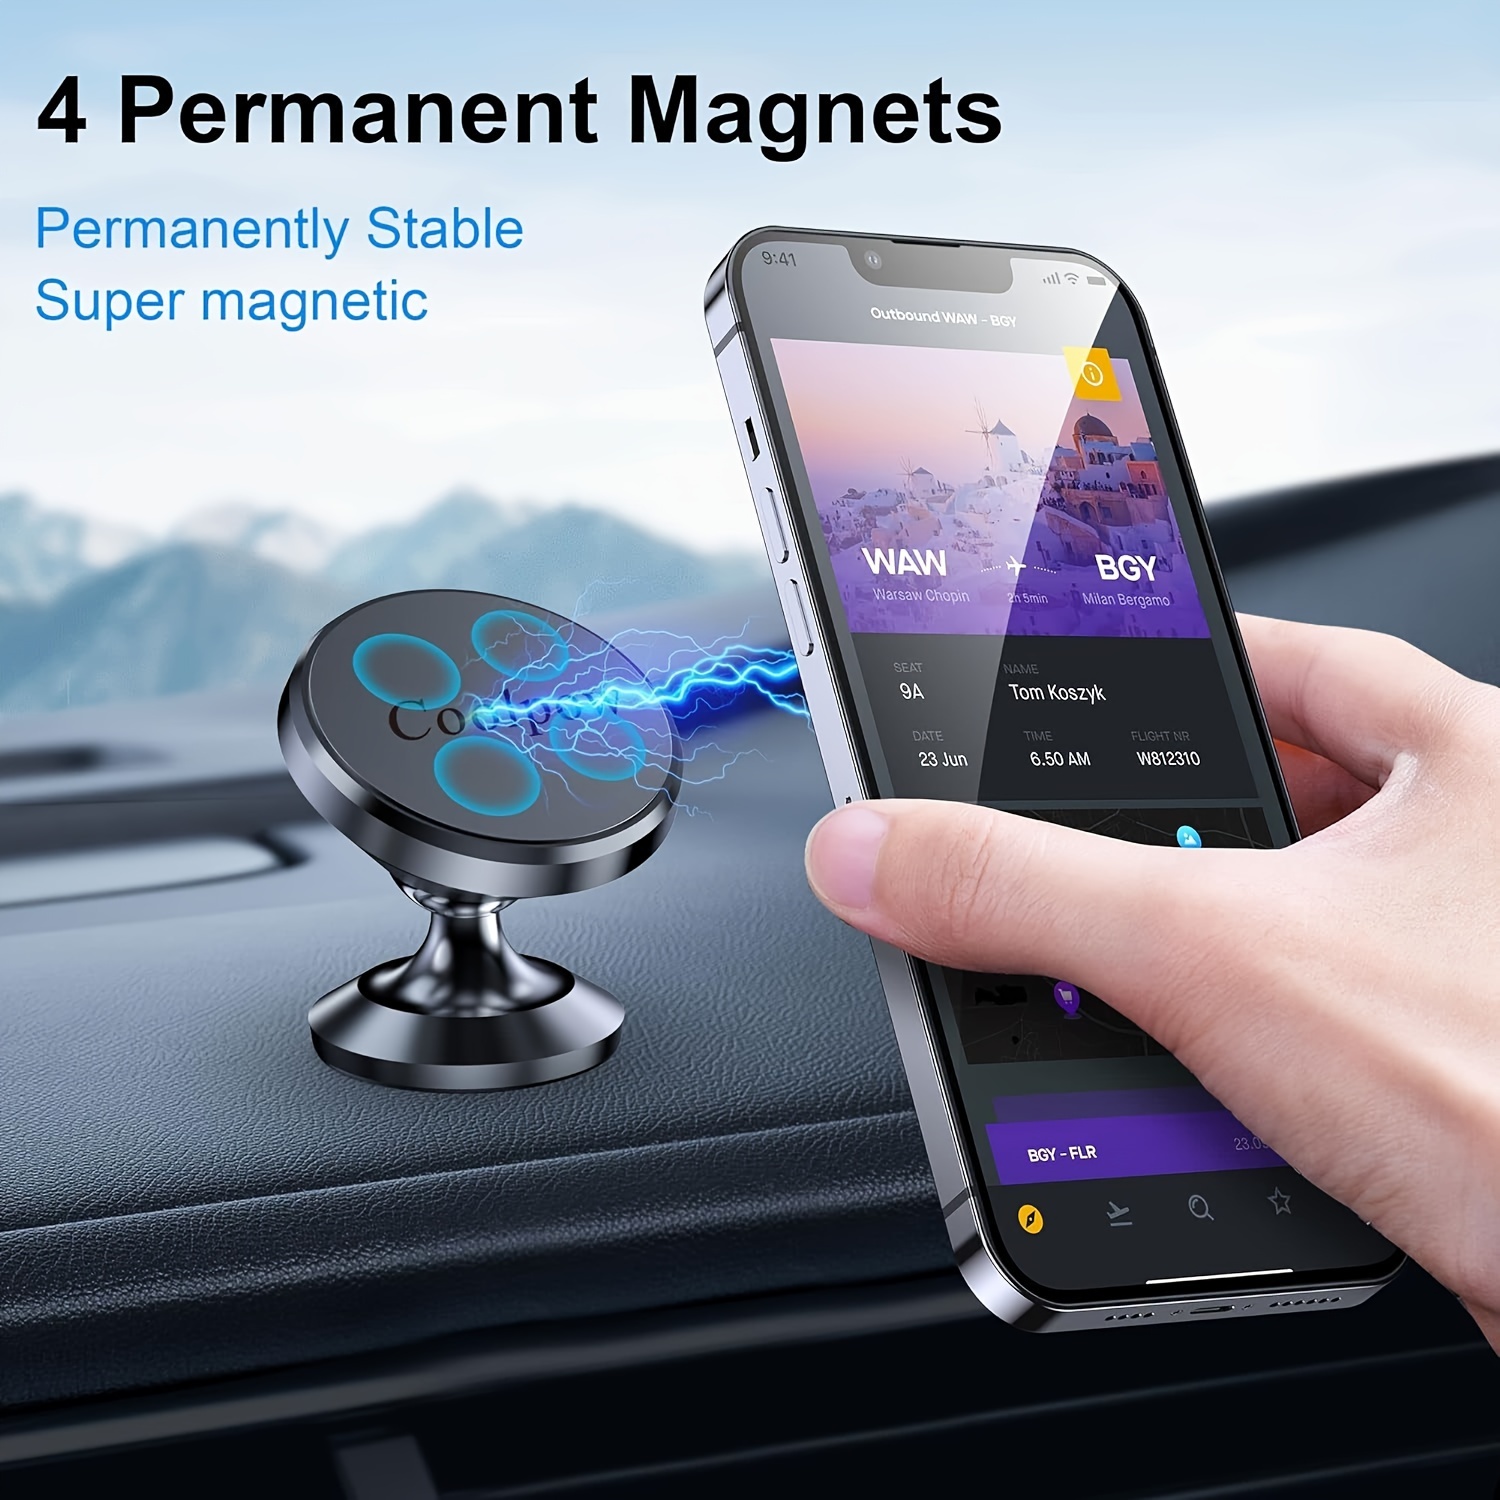 

Universal Magnetic Car Phone Holder - Super Strong Magnet, 360° Rotation, Fits All Smartphones -for Iphone And Android Compatible